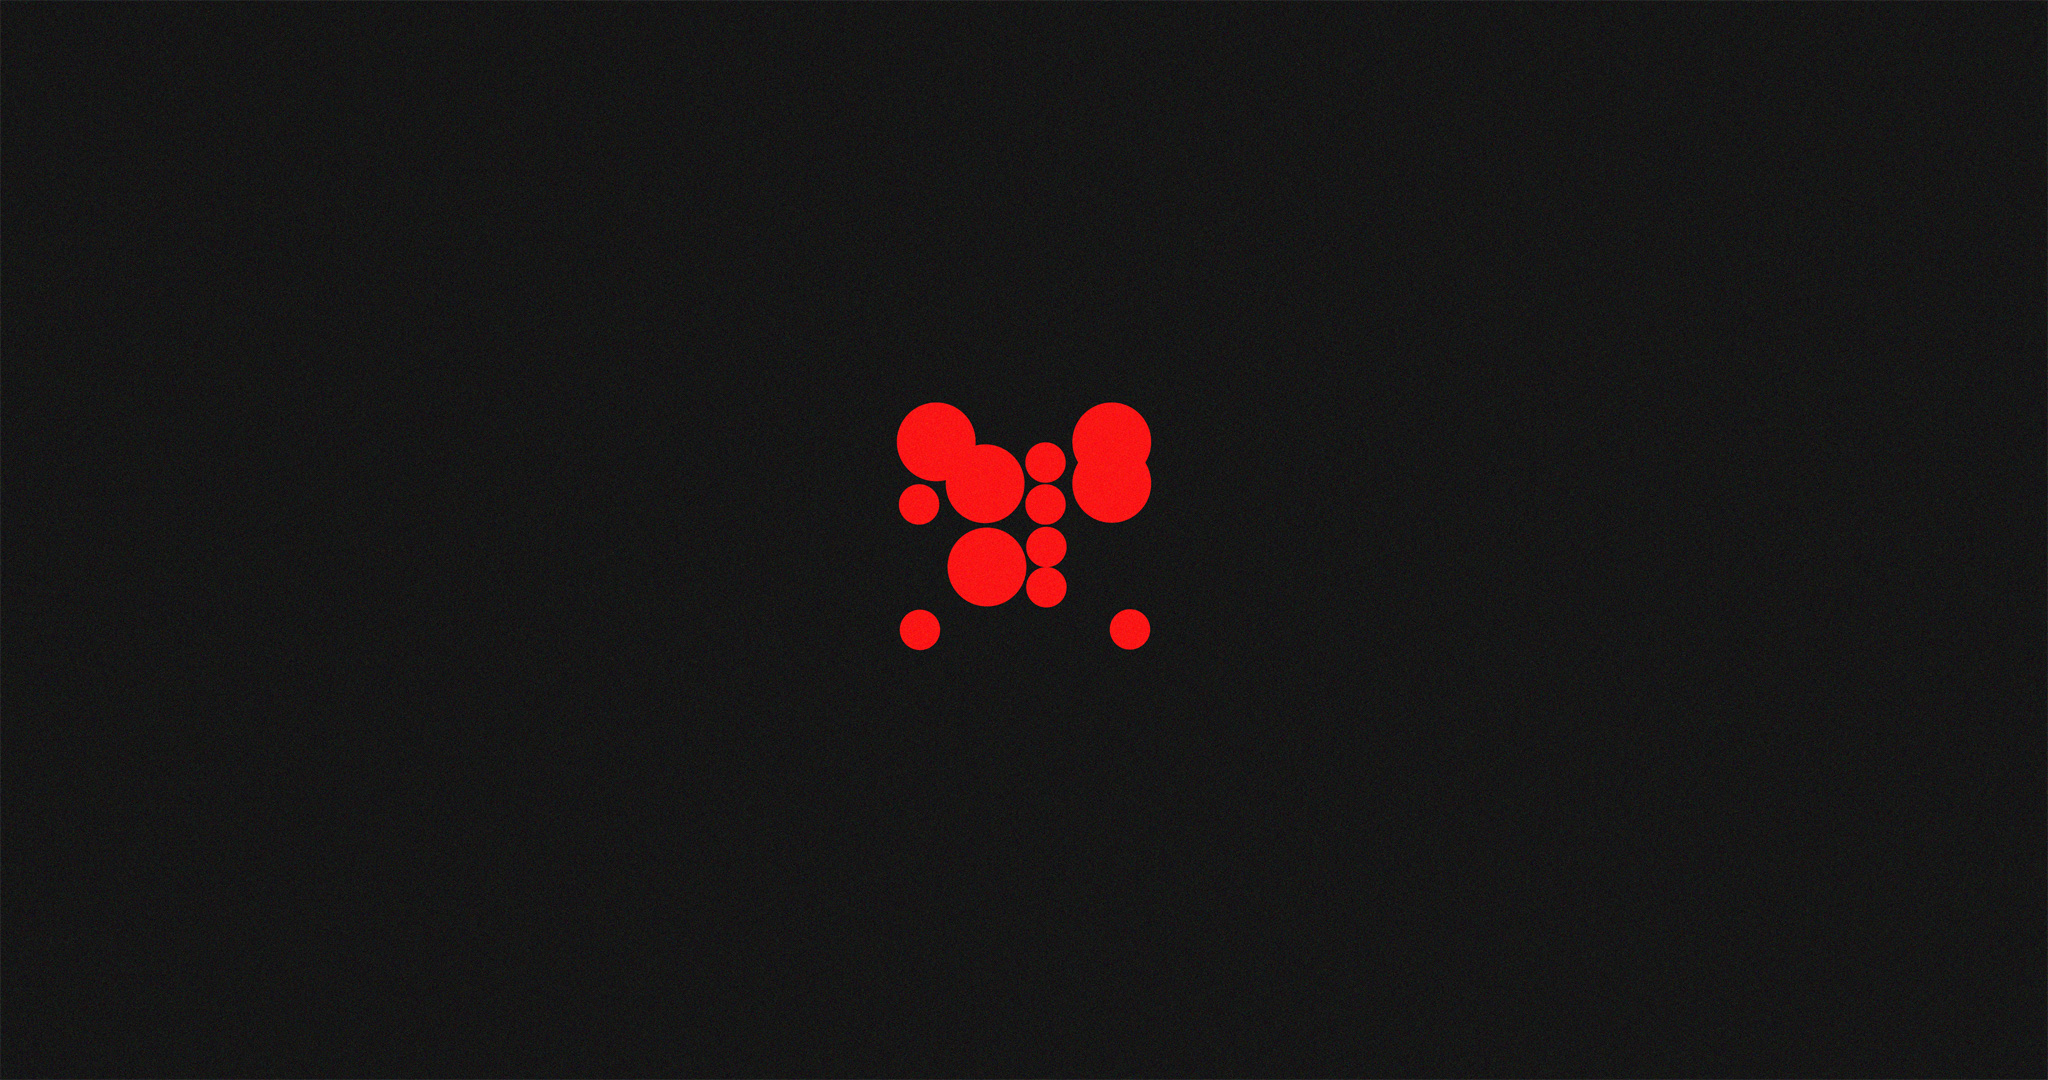 Proportionally-sized red circles arranged in a grid-like manner, covering a square area. Silhouette for a logotype which appears later in this article.